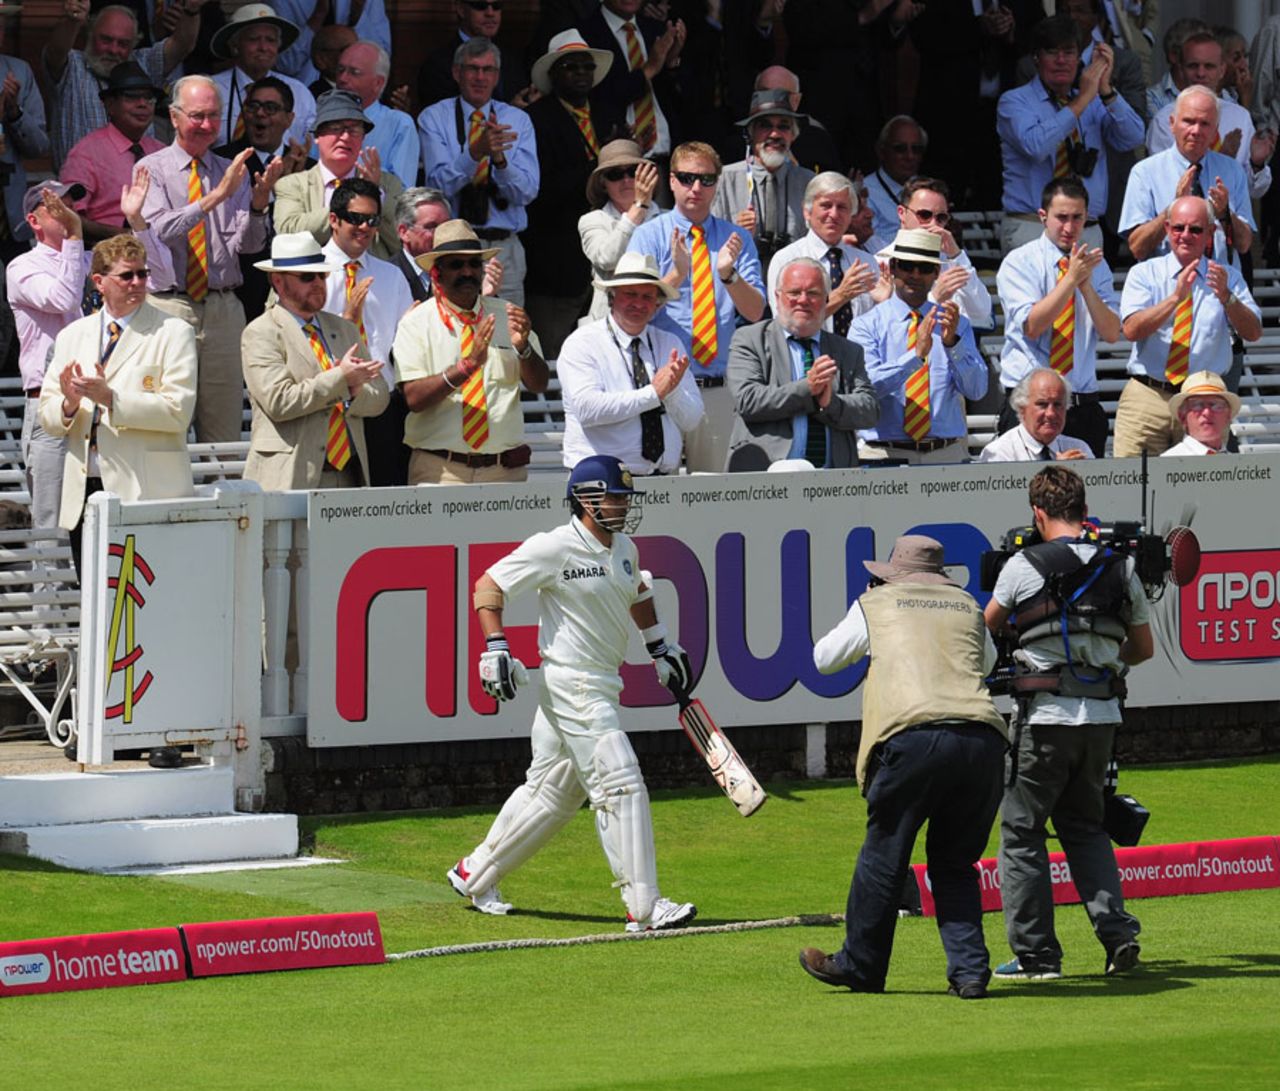 Sachin Tendulkar walks out to applause from the crowd, England v India, 1st Test, Lord's, 5th day, July 25, 2011